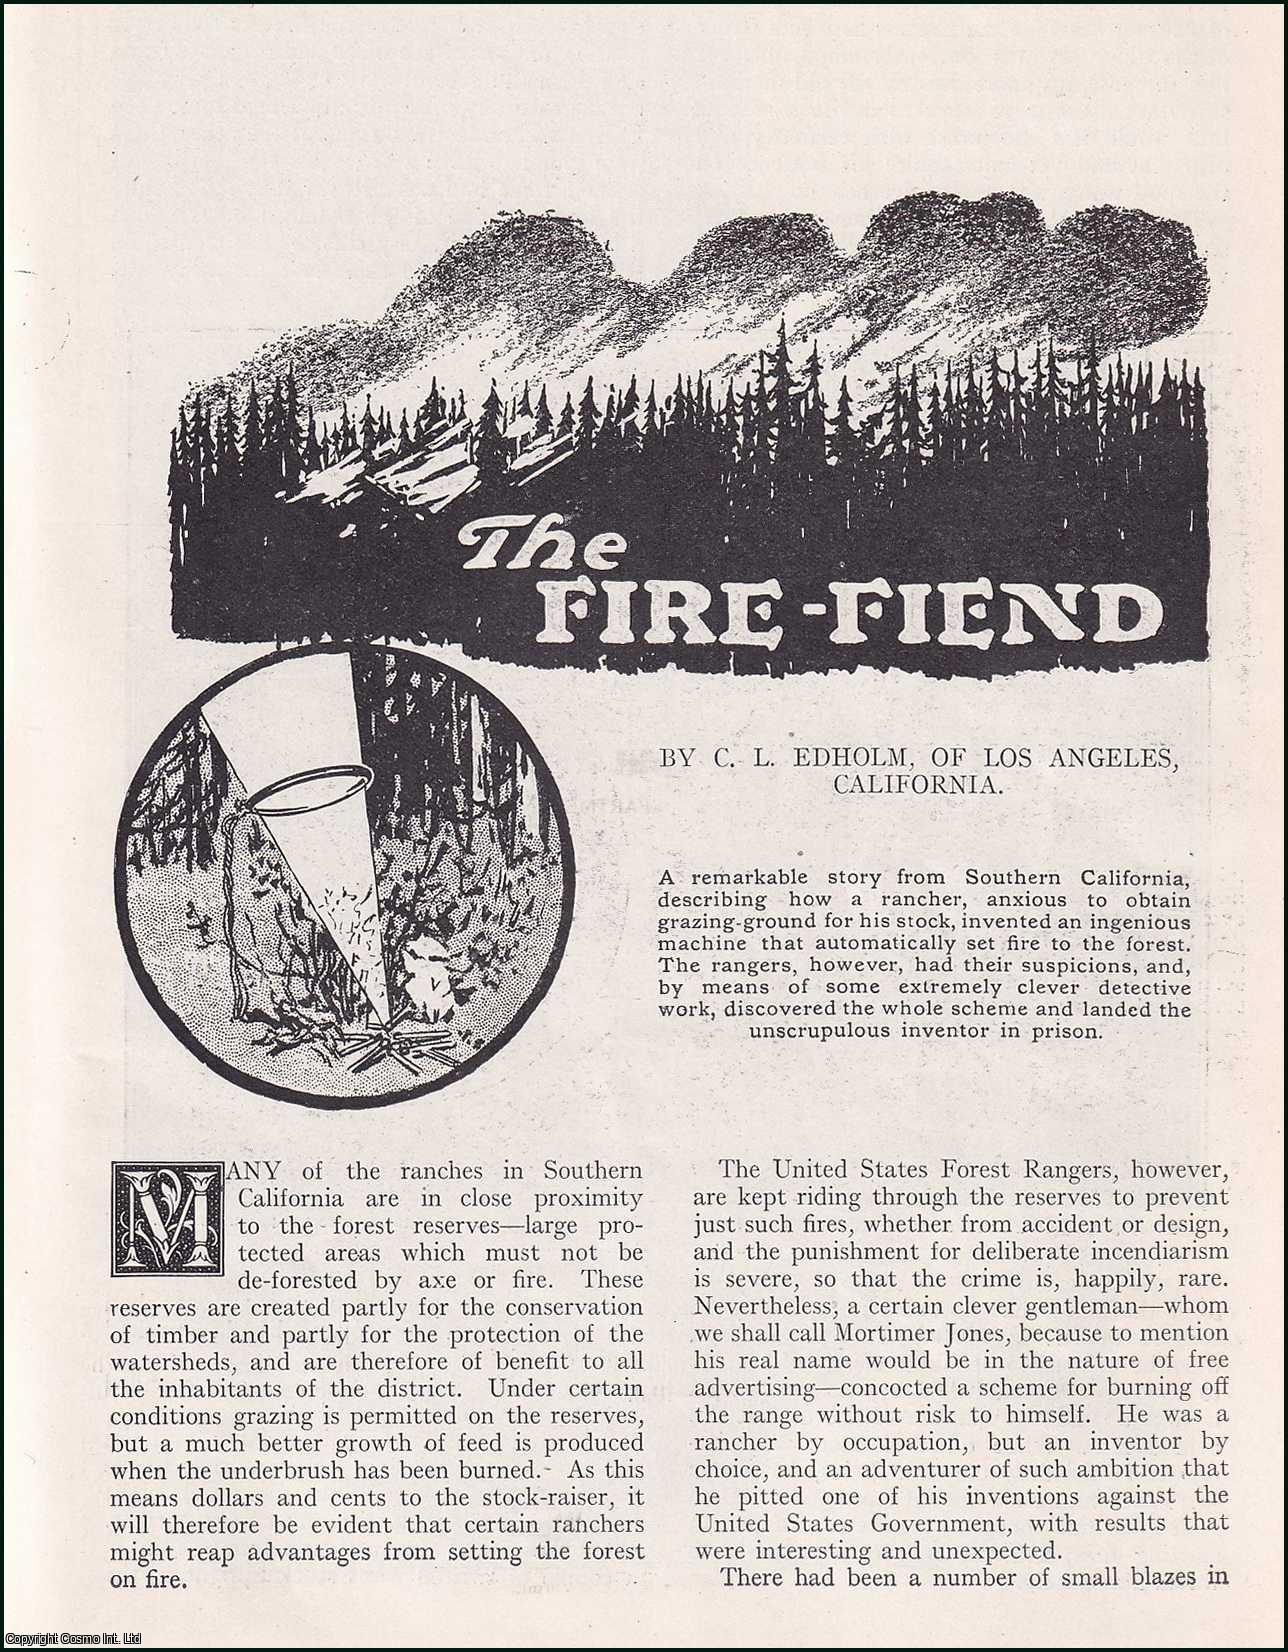 C.L. Edholm, of Los Angeles, California., C. L. - The Fire-Fiend. Fire setting in the Southern California Forests. An uncommon original article from the Wide World Magazine, 1912.